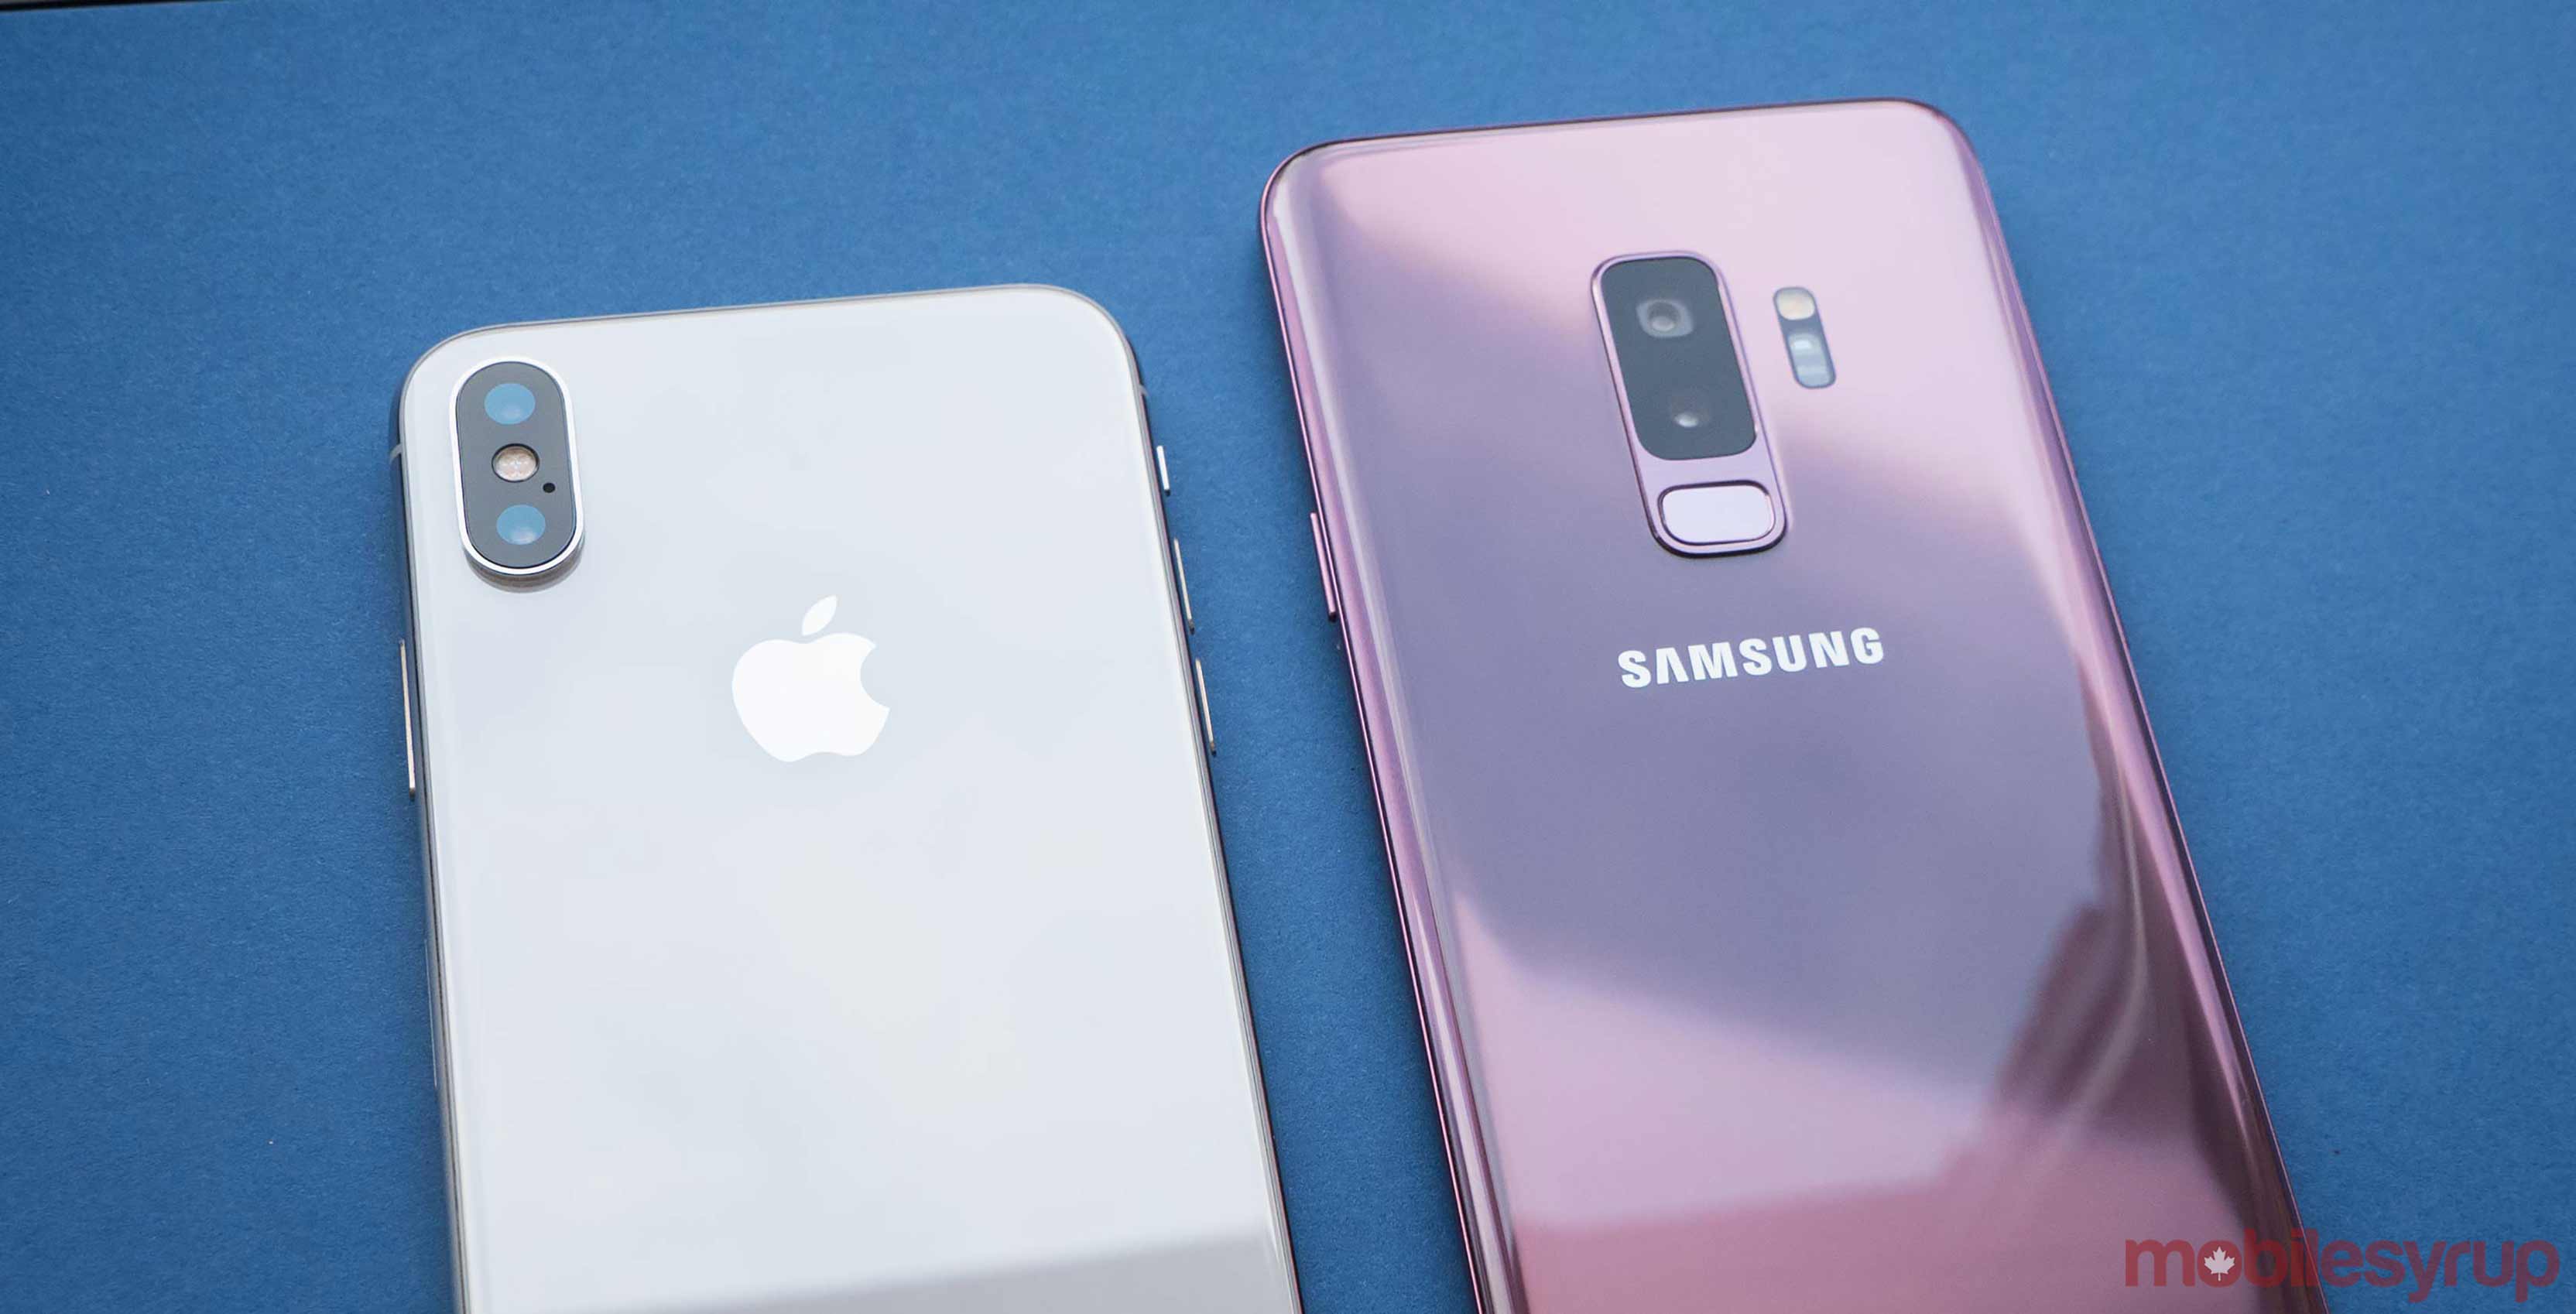 Samsung Galaxy S9 and iPhone X